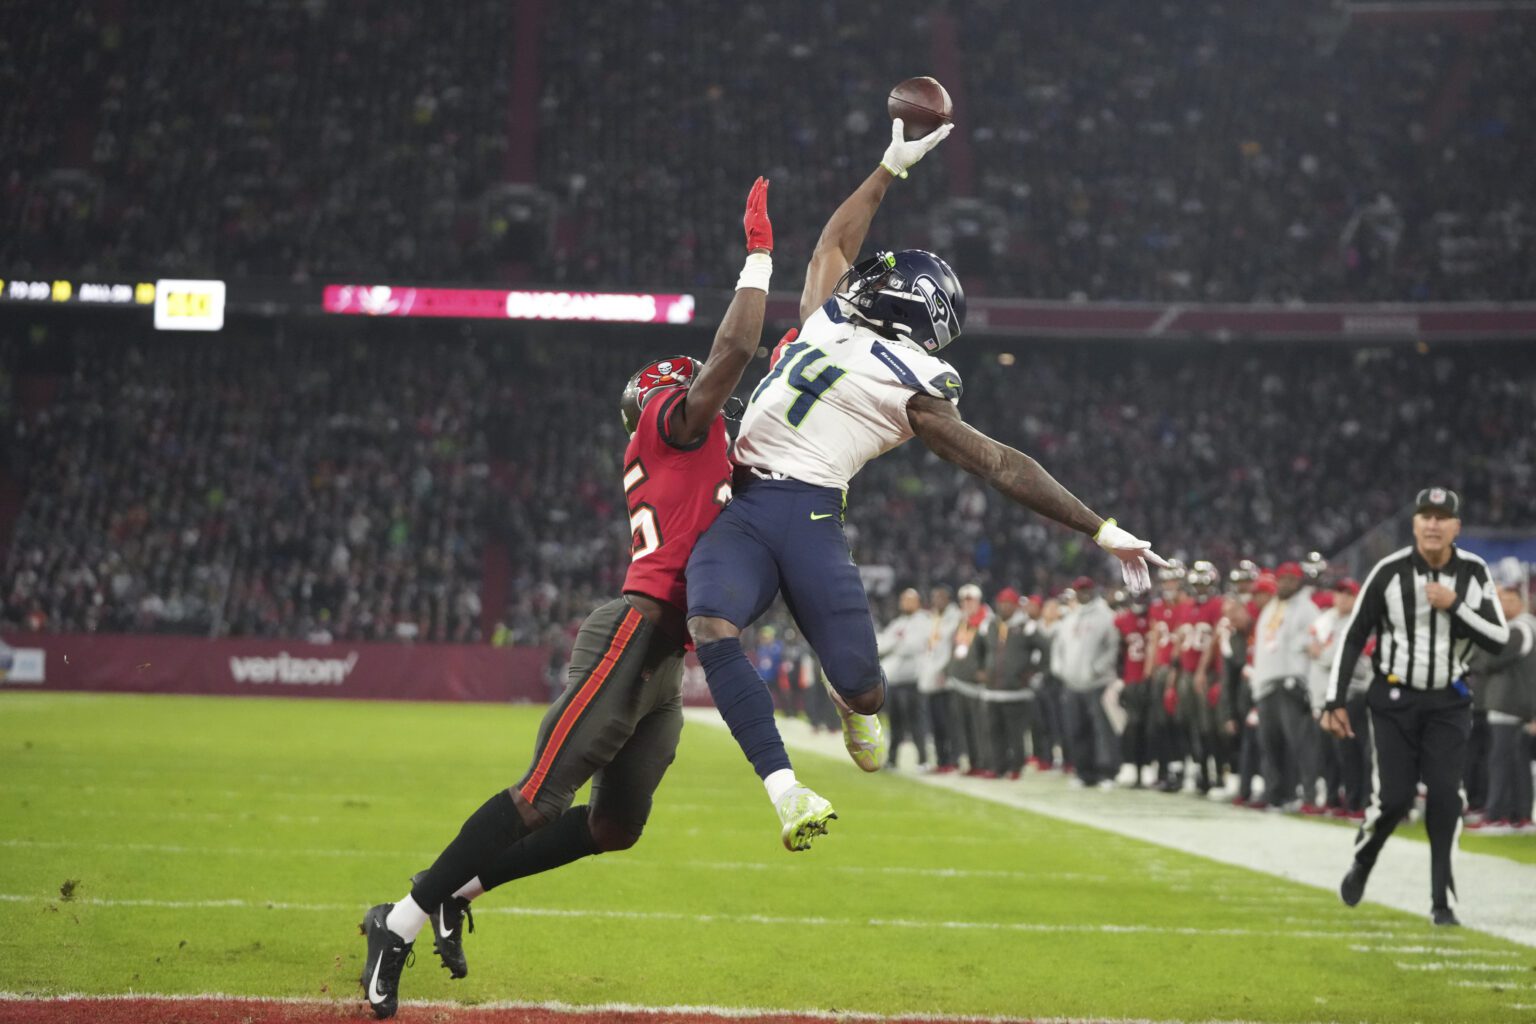 Seattle Seahawks' DK Metcalf (14) is defended by Tampa Bay Buccaneers' Jamel Dean (35) during the second half of an NFL football game in Munich